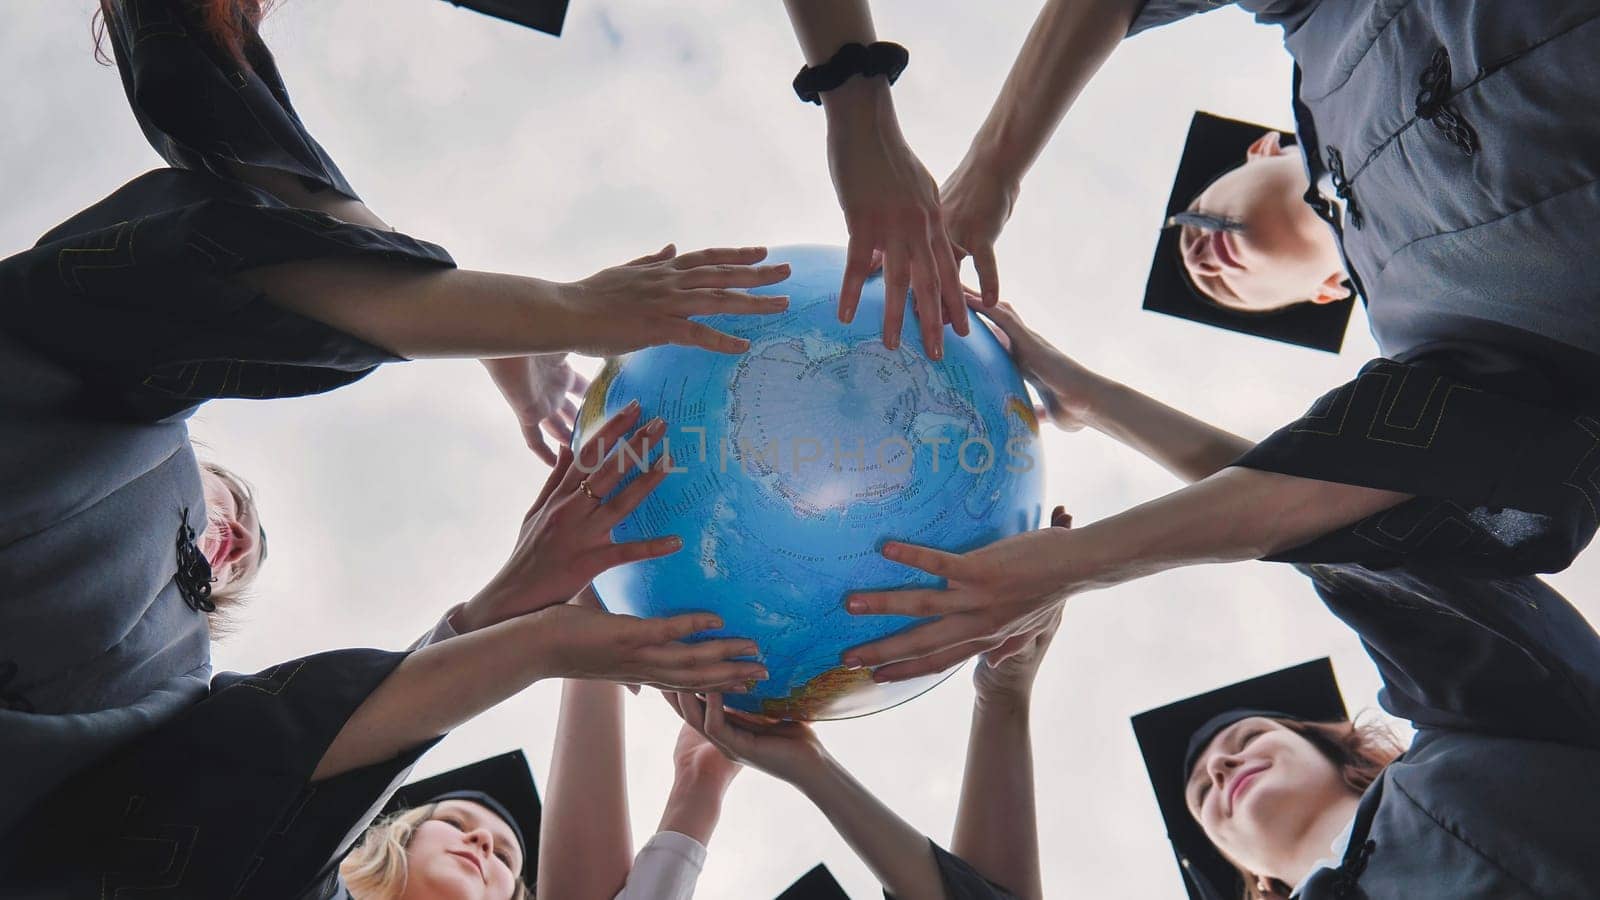 The concept of a world without war. College graduates holding a geographical globe of the world. by DovidPro